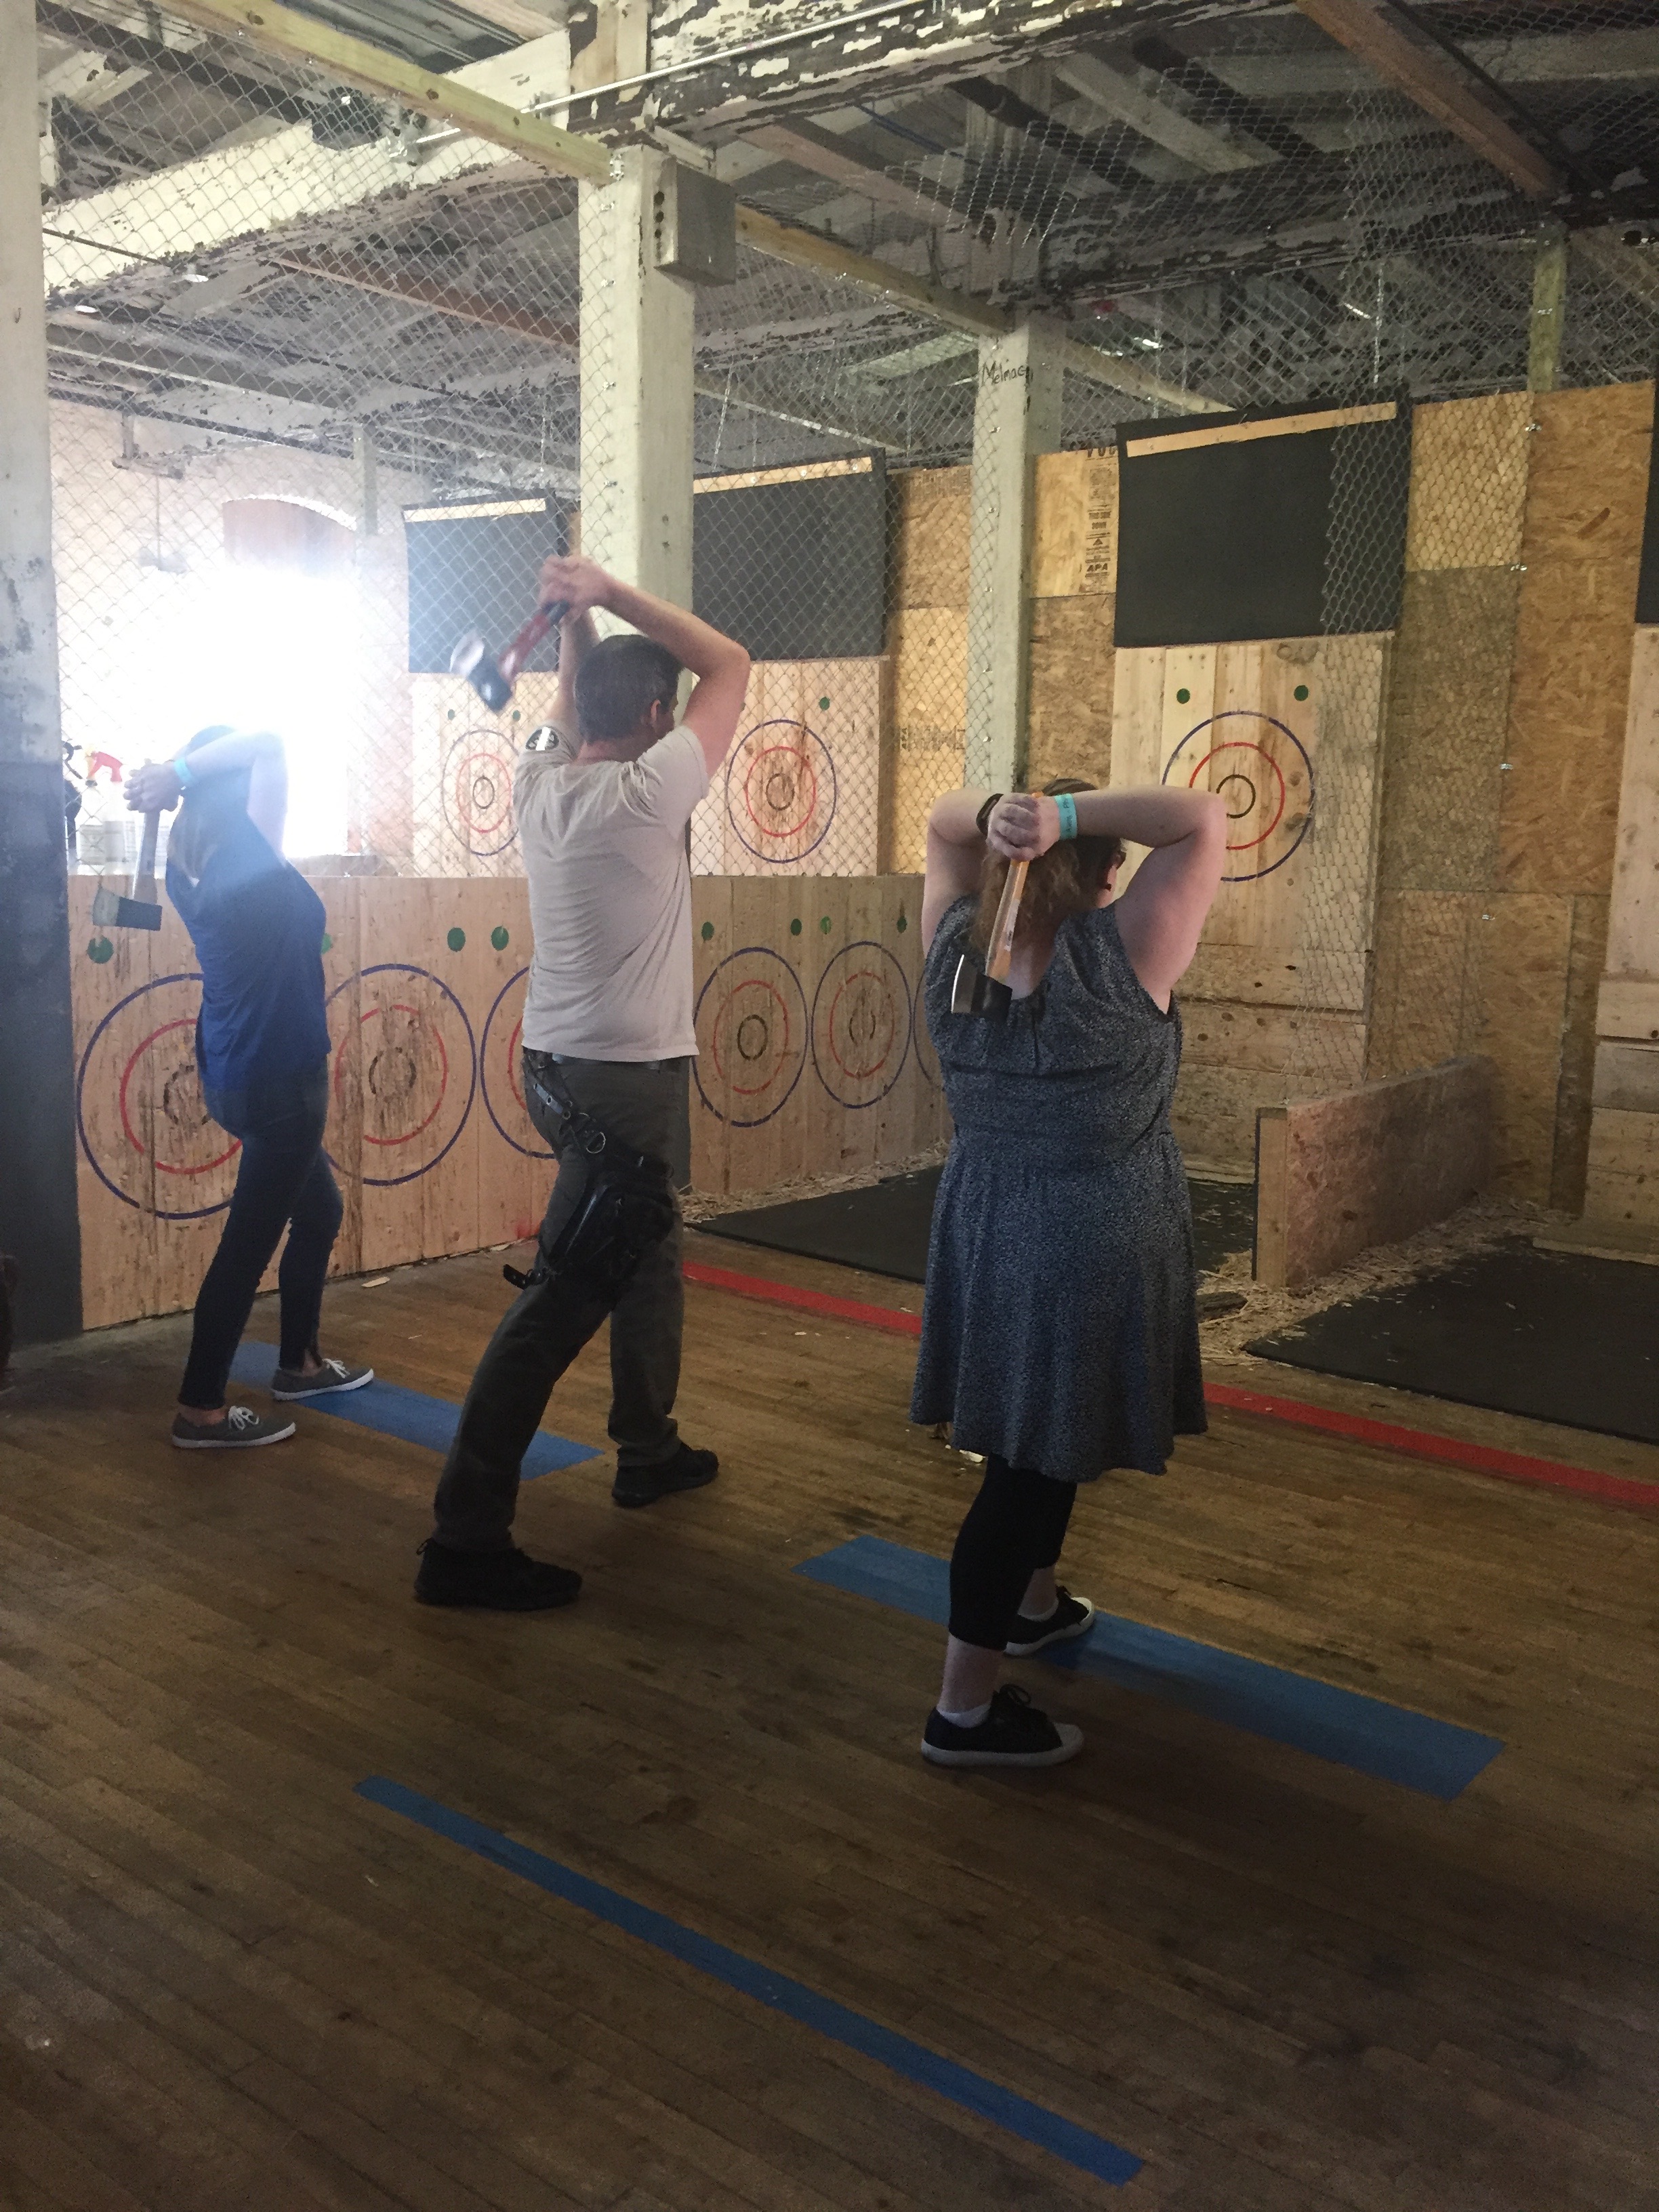 Learning the proper technique for throwing axes.